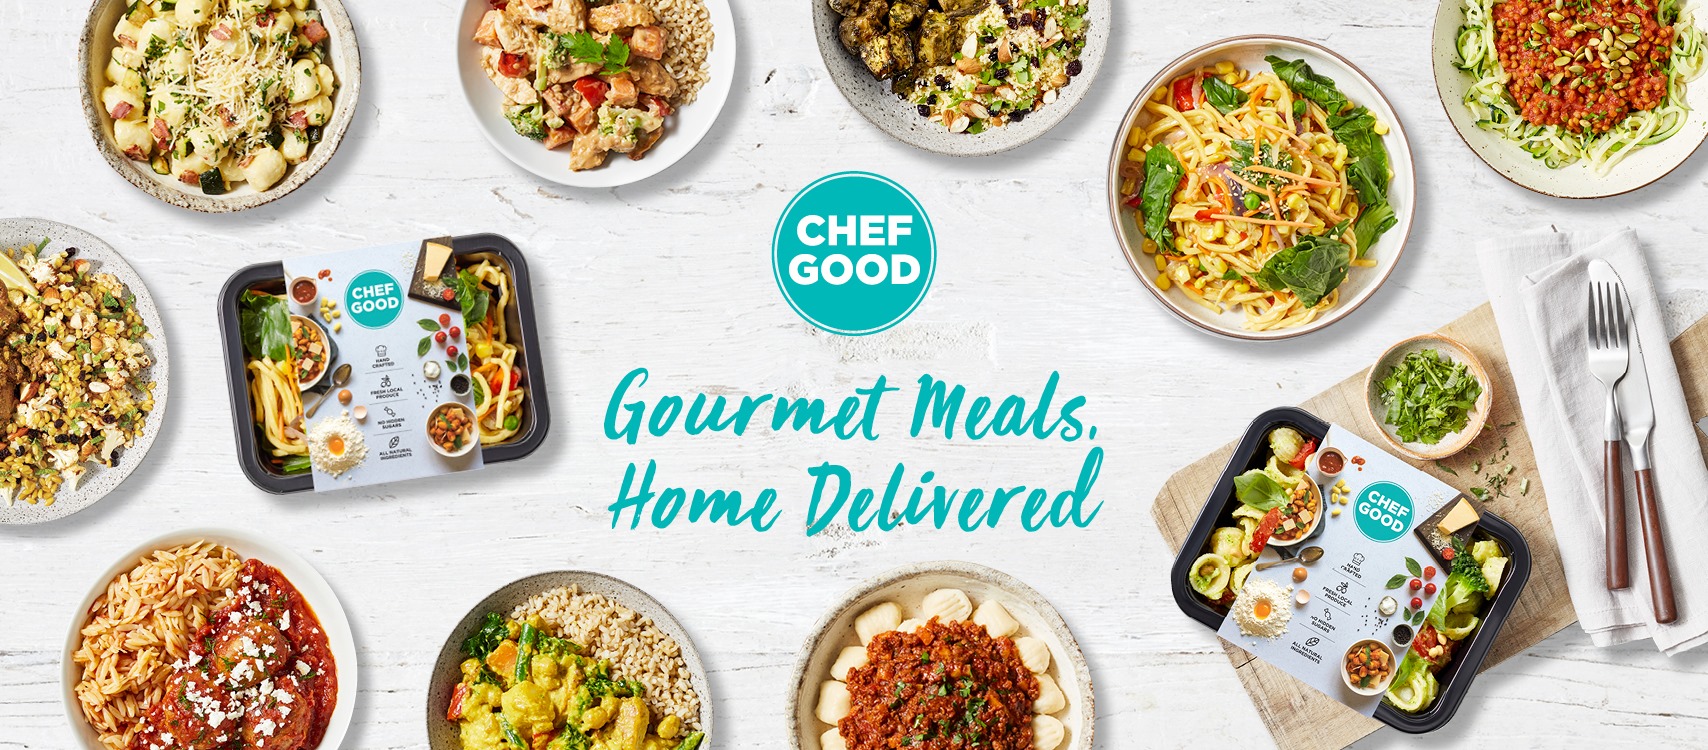 Shh, Chefgood extra 30% OFF on your order with voucher code